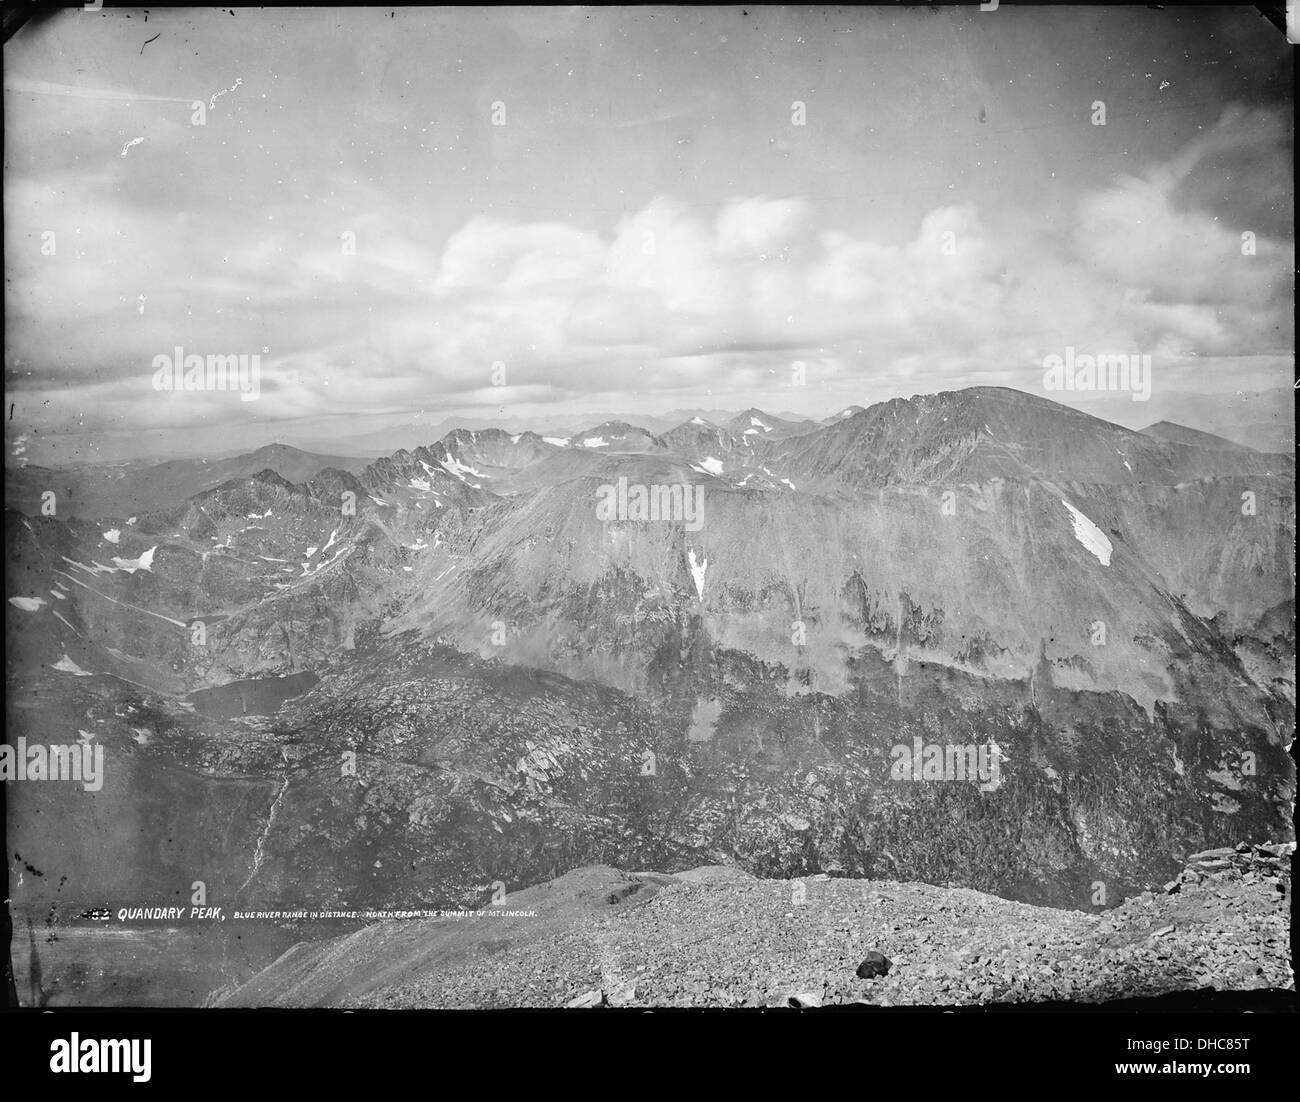 Panorama from summit of Mount Lincoln, shows Quandary Peak and Blue River Range. 517682 Stock Photo